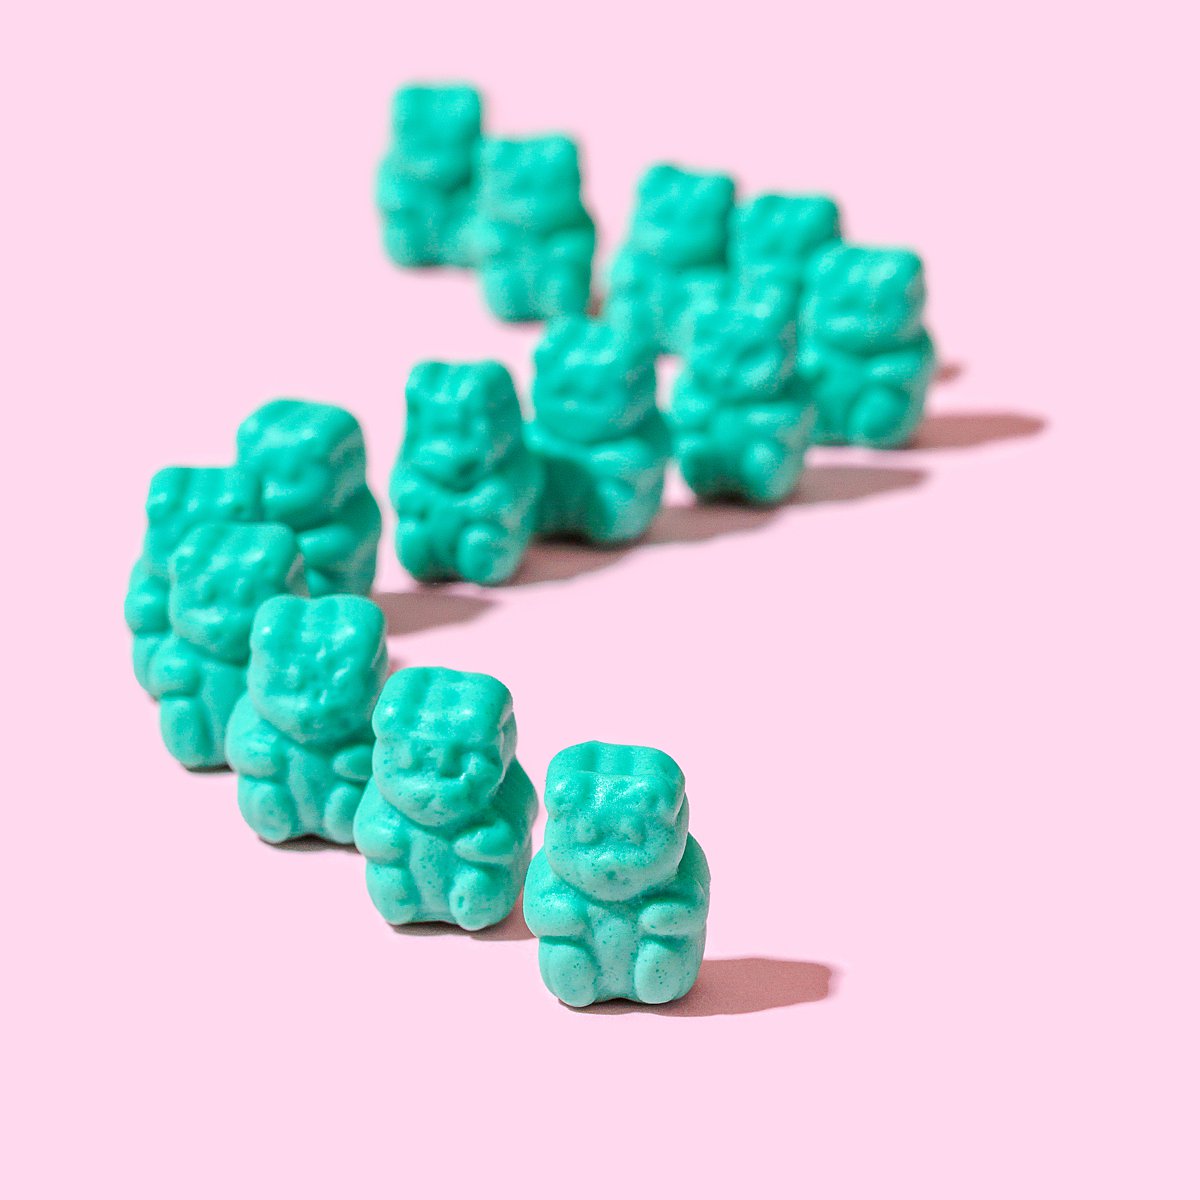 Colourful content creation for SugarBearHair vitamin supplements. Styled product stills photography by Marianne Taylor.